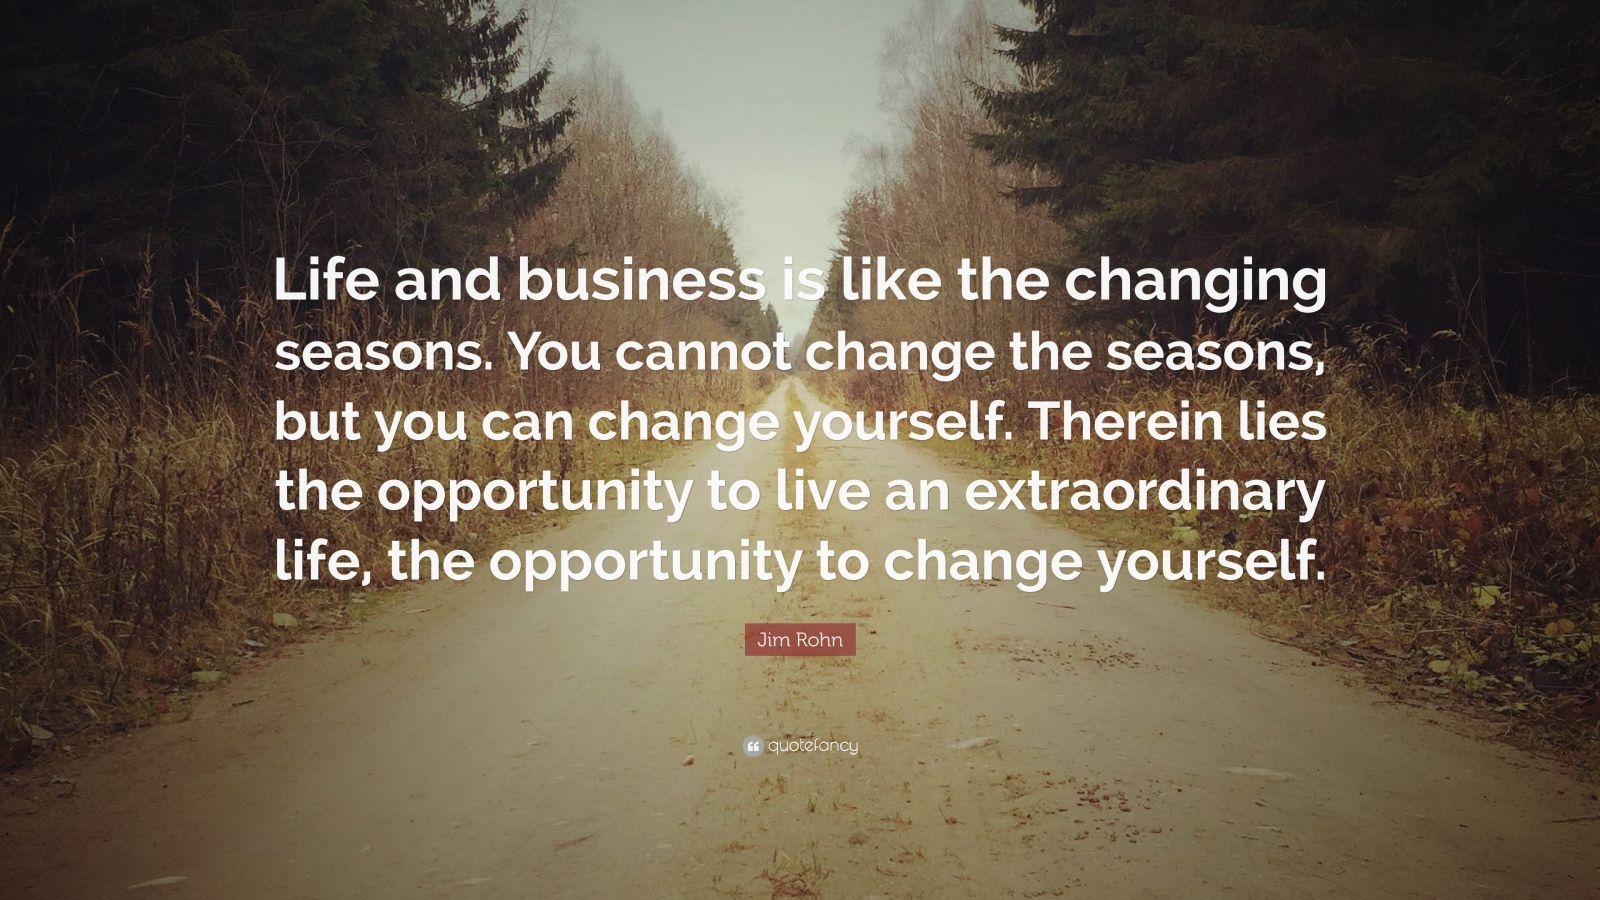 97301 Jim Rohn Quote Life and business is like the changing seasons You